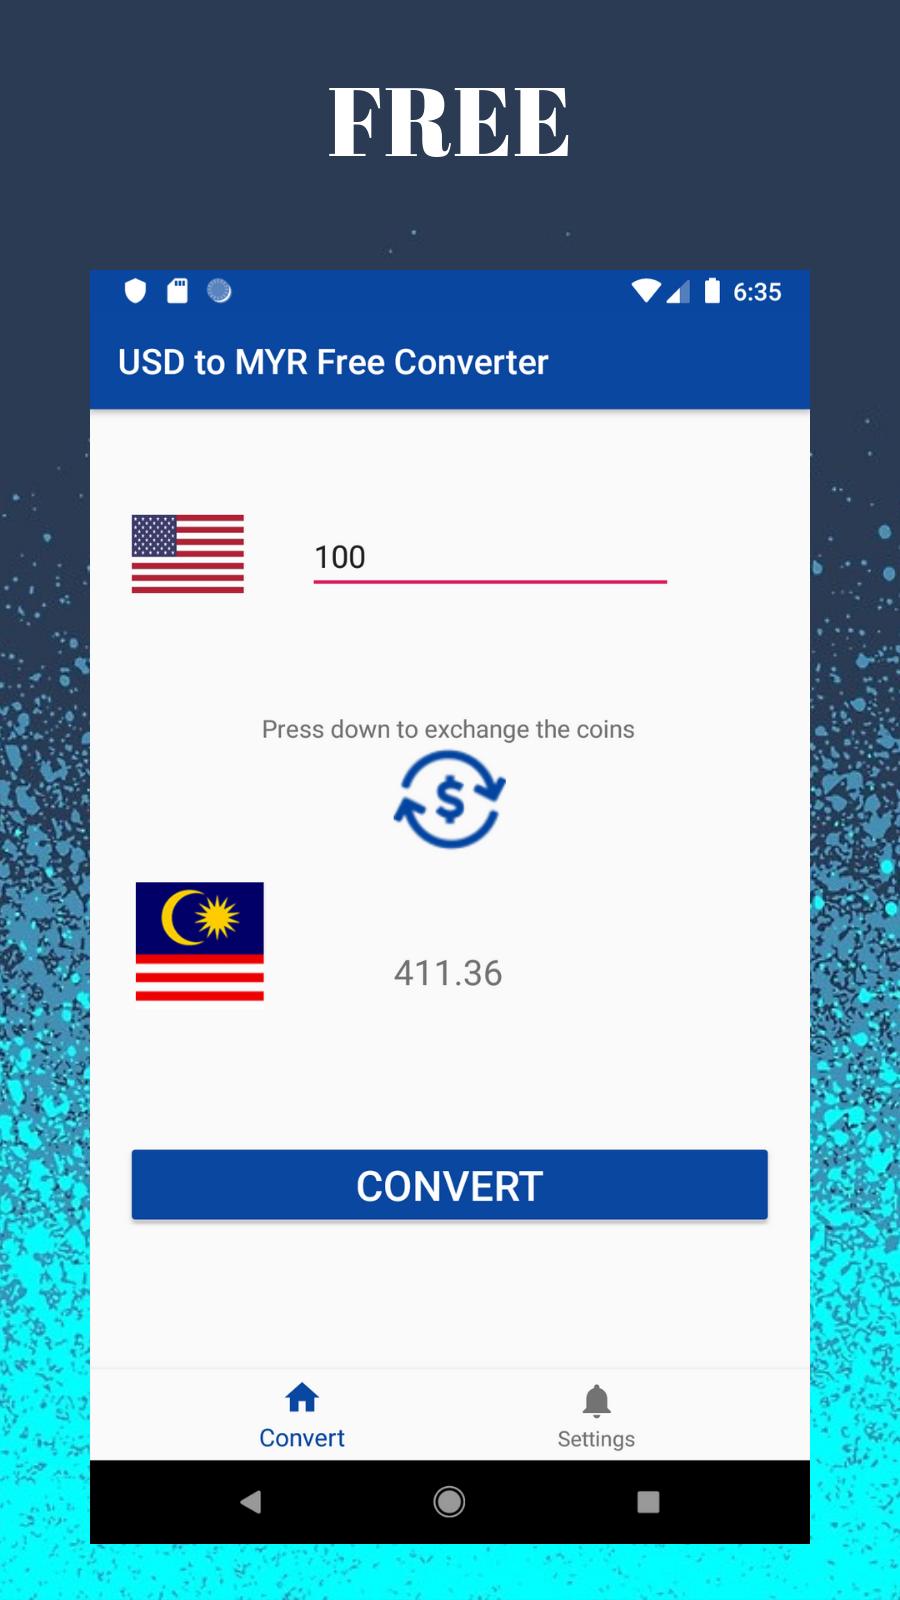 To rm usd convert 1 USD